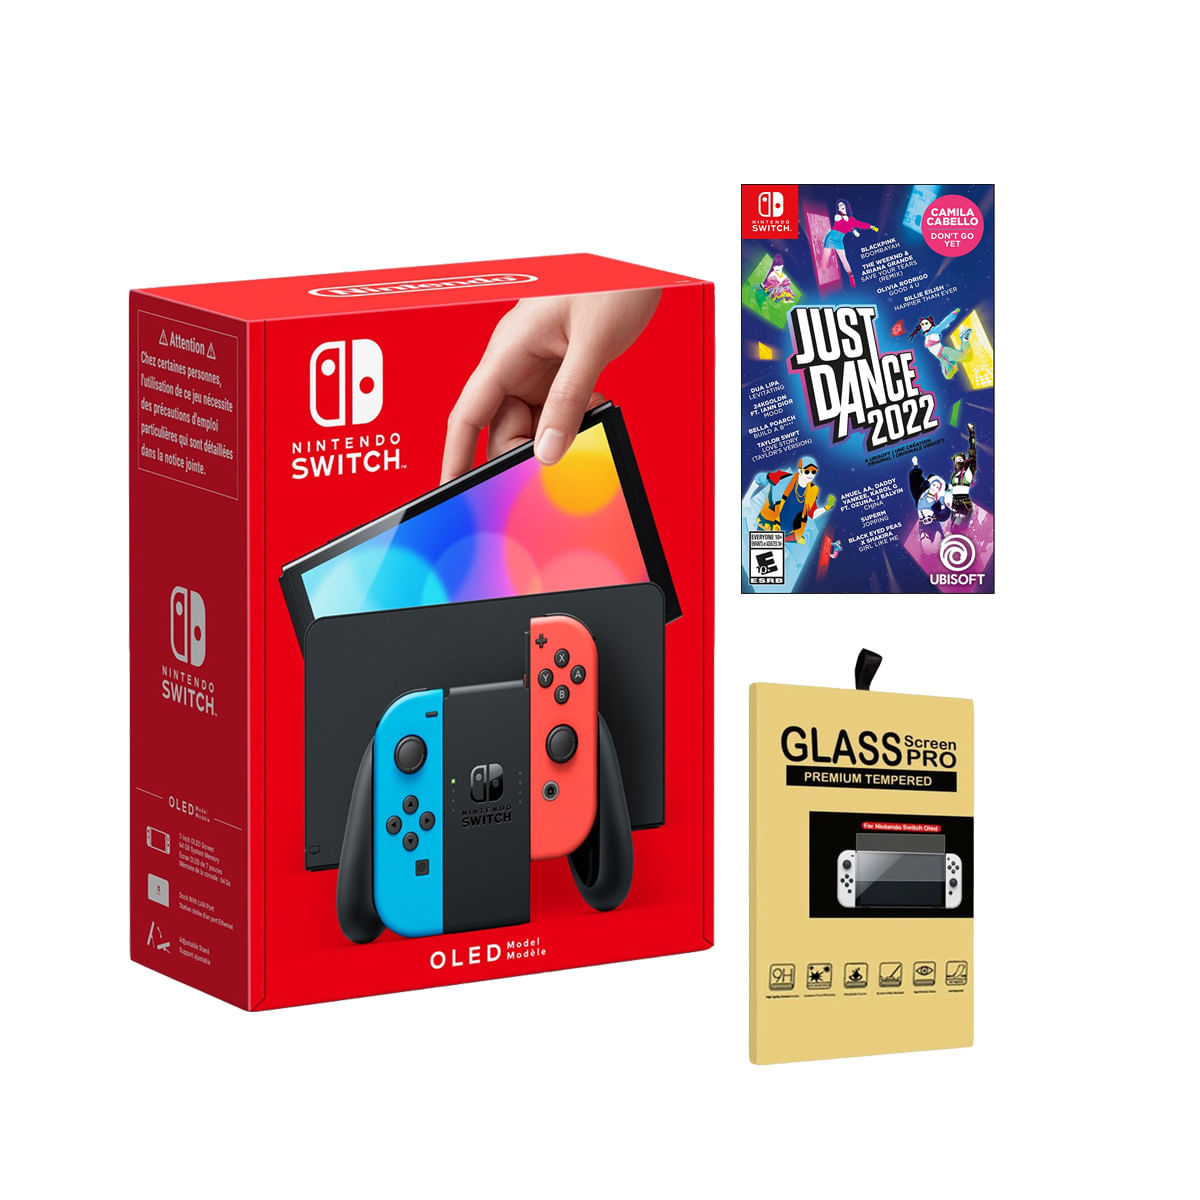 Consola Nintendo Switch Oled Neon + Just Dance 2022 + Mica